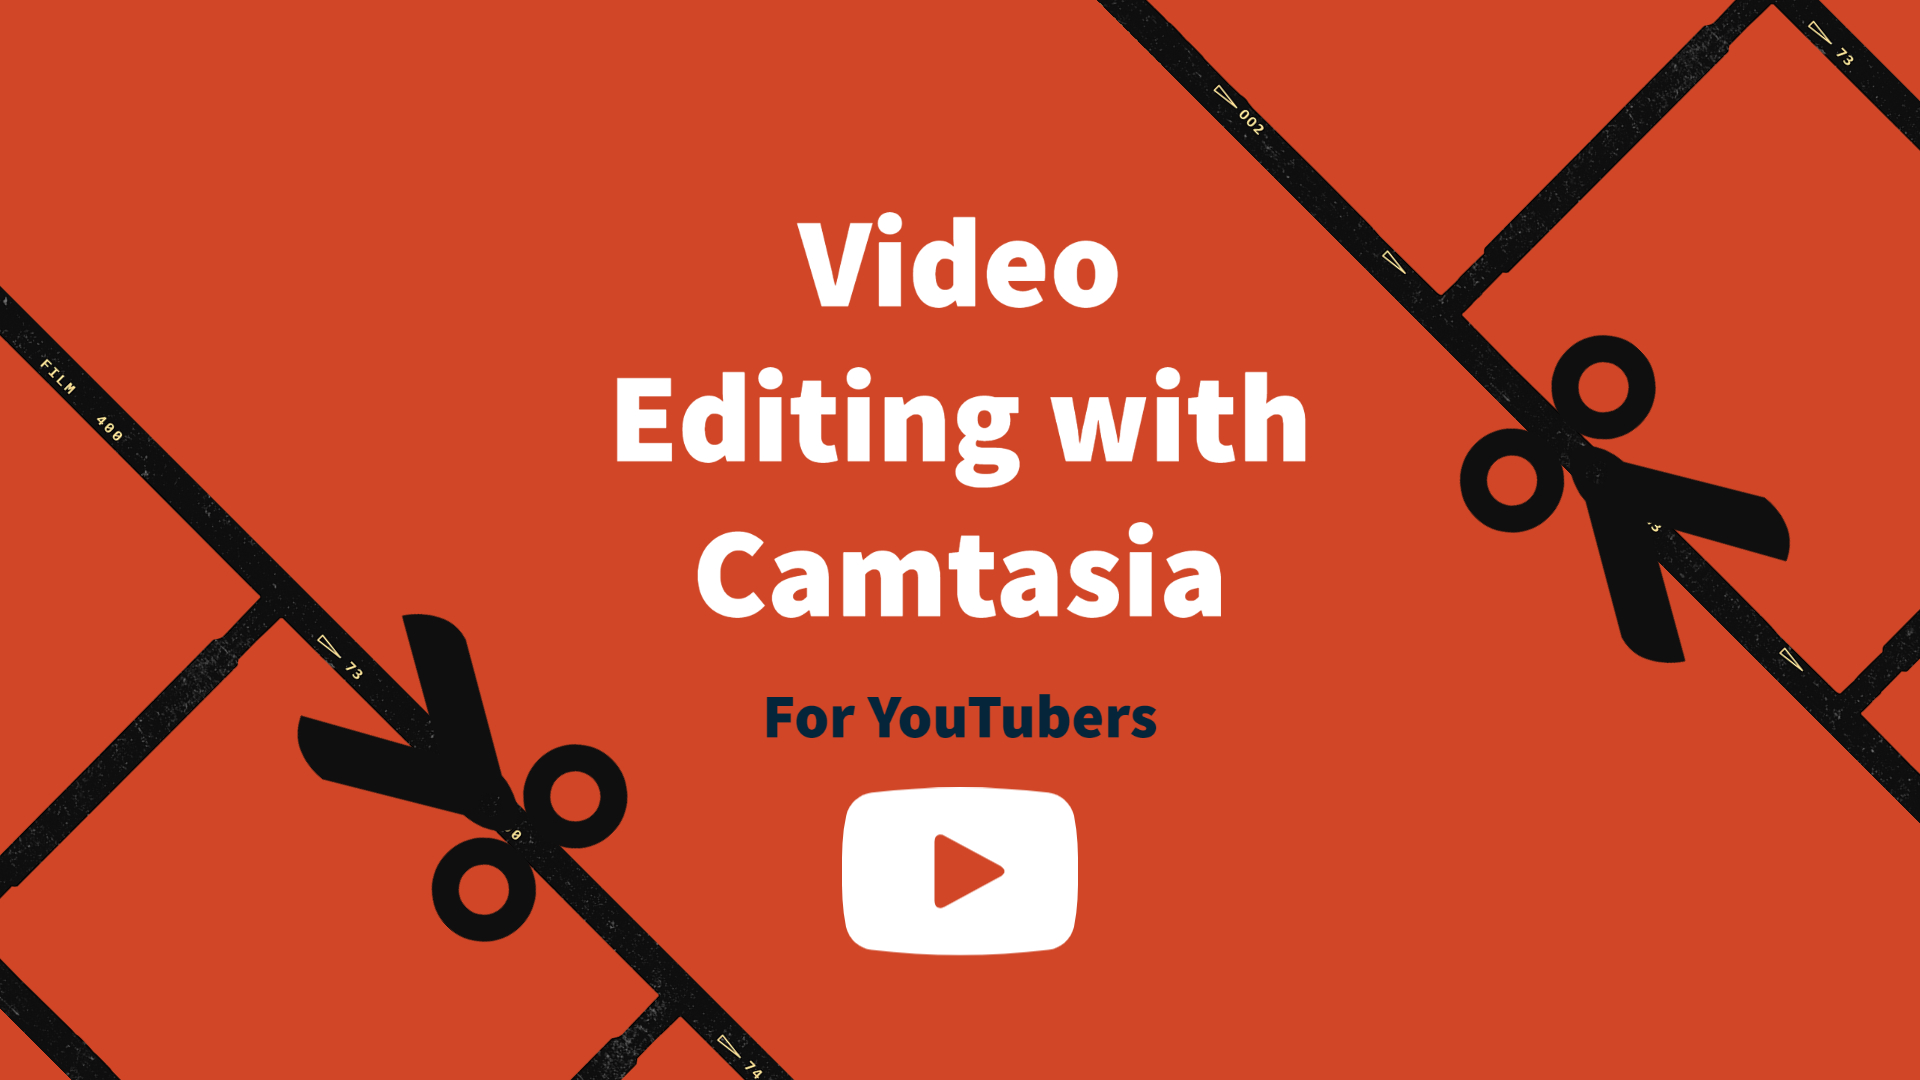 Video Editing with Camtasia for YouTubers Course Featured Image